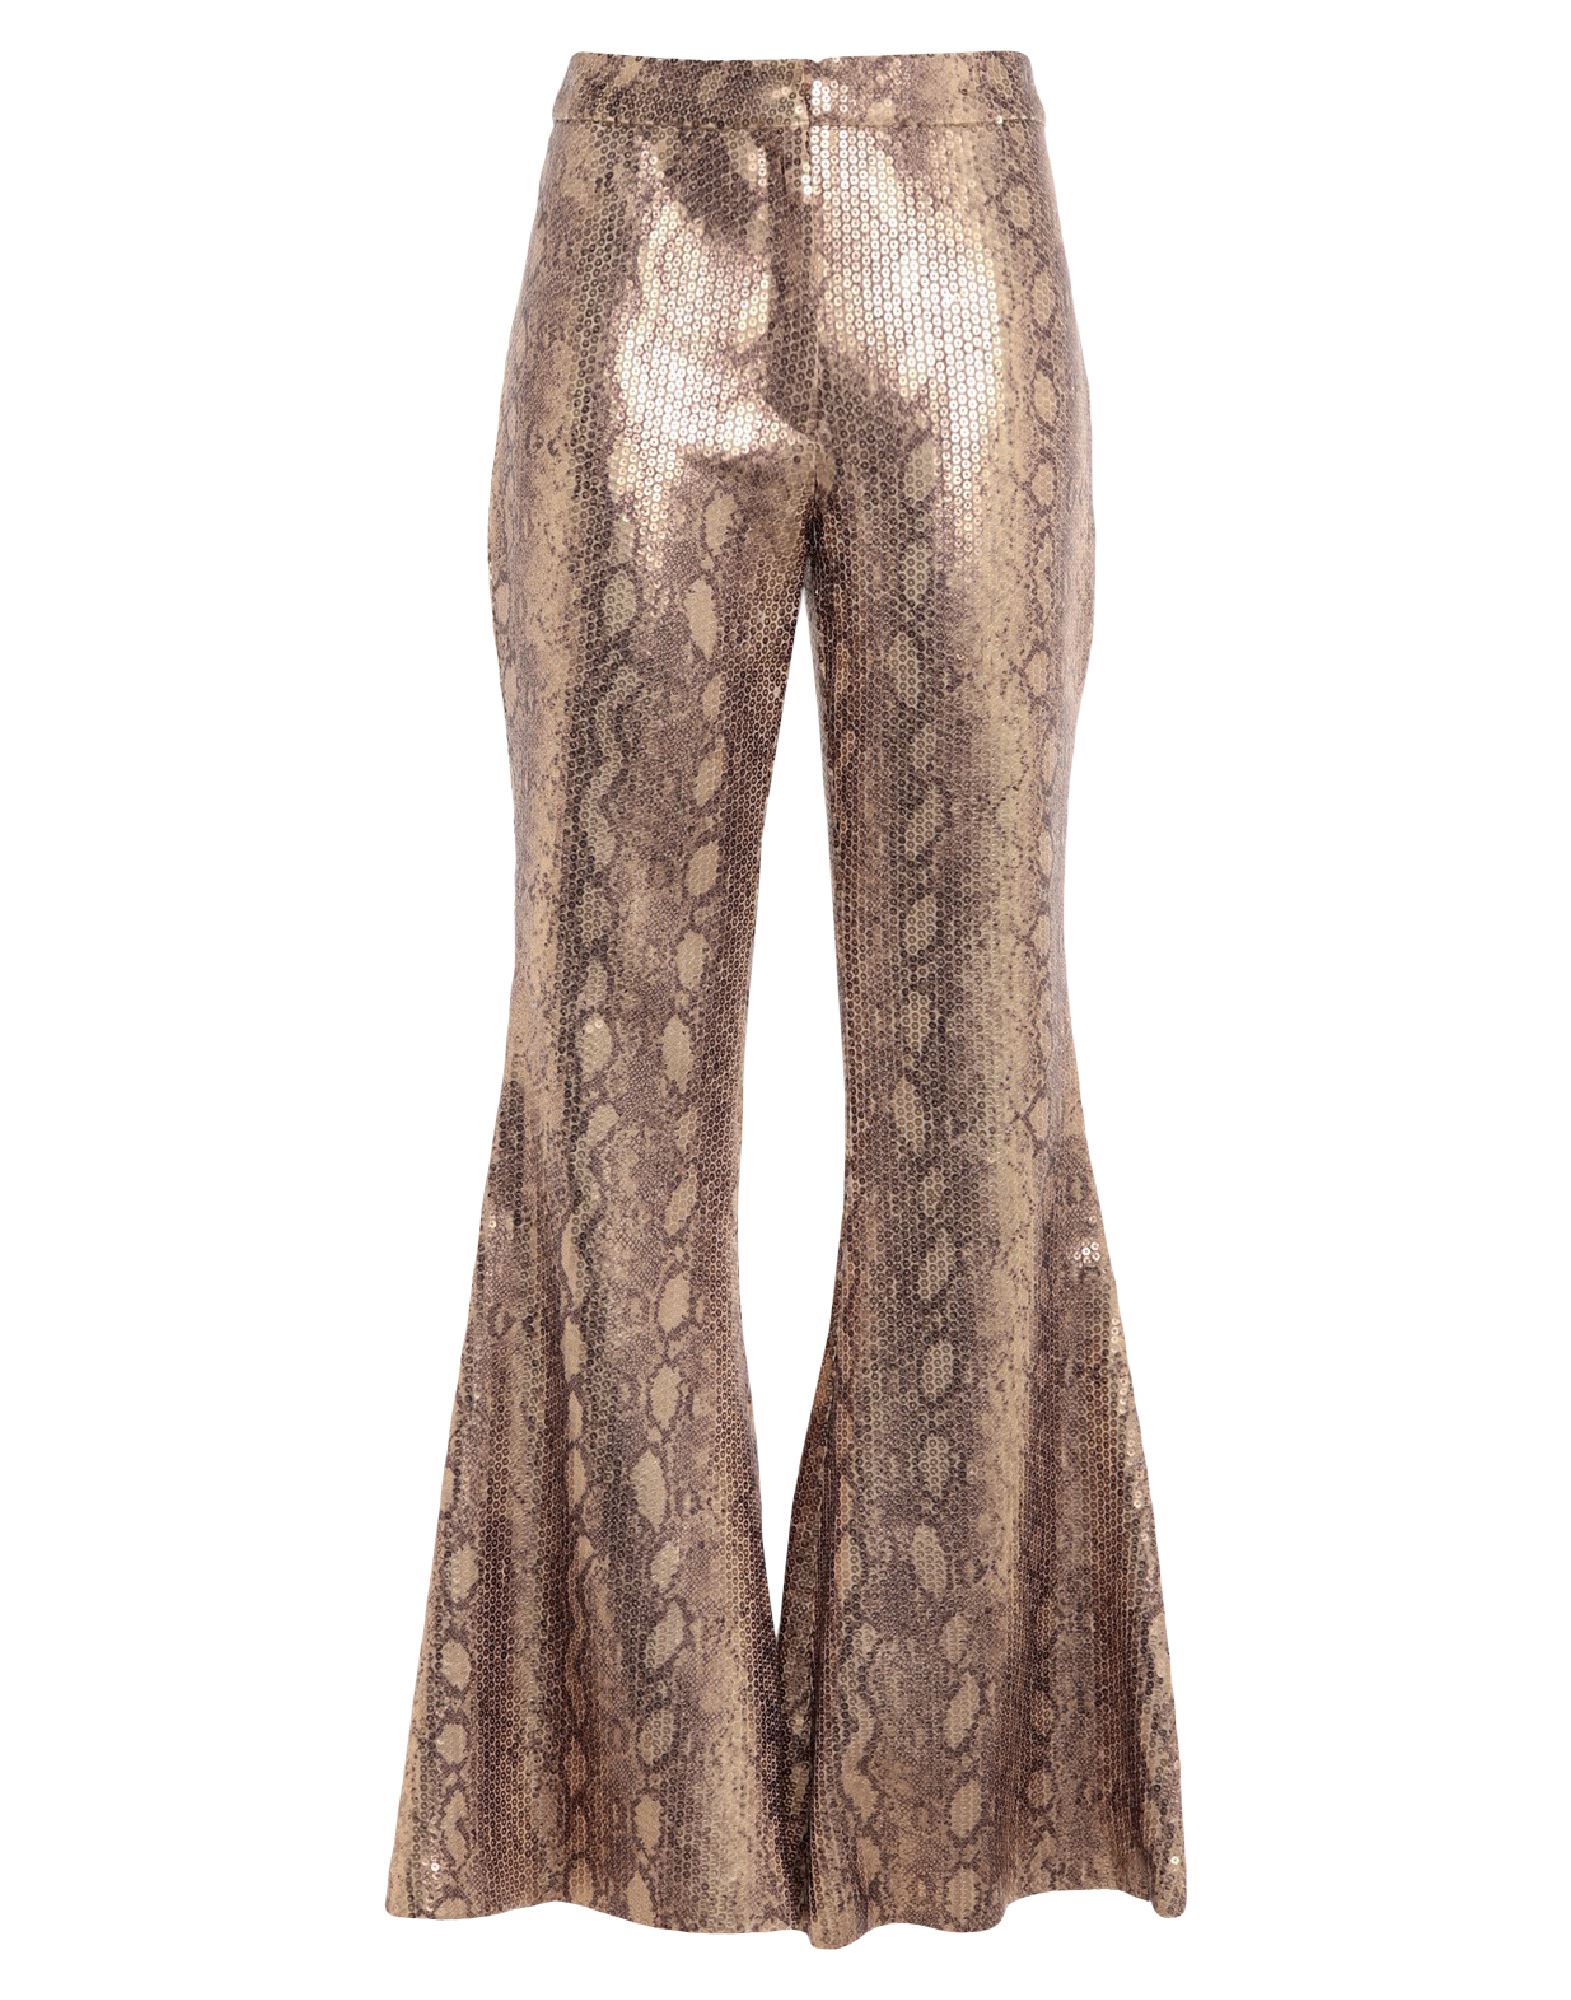 IN THE MOOD FOR LOVE Hose Damen Gold von IN THE MOOD FOR LOVE